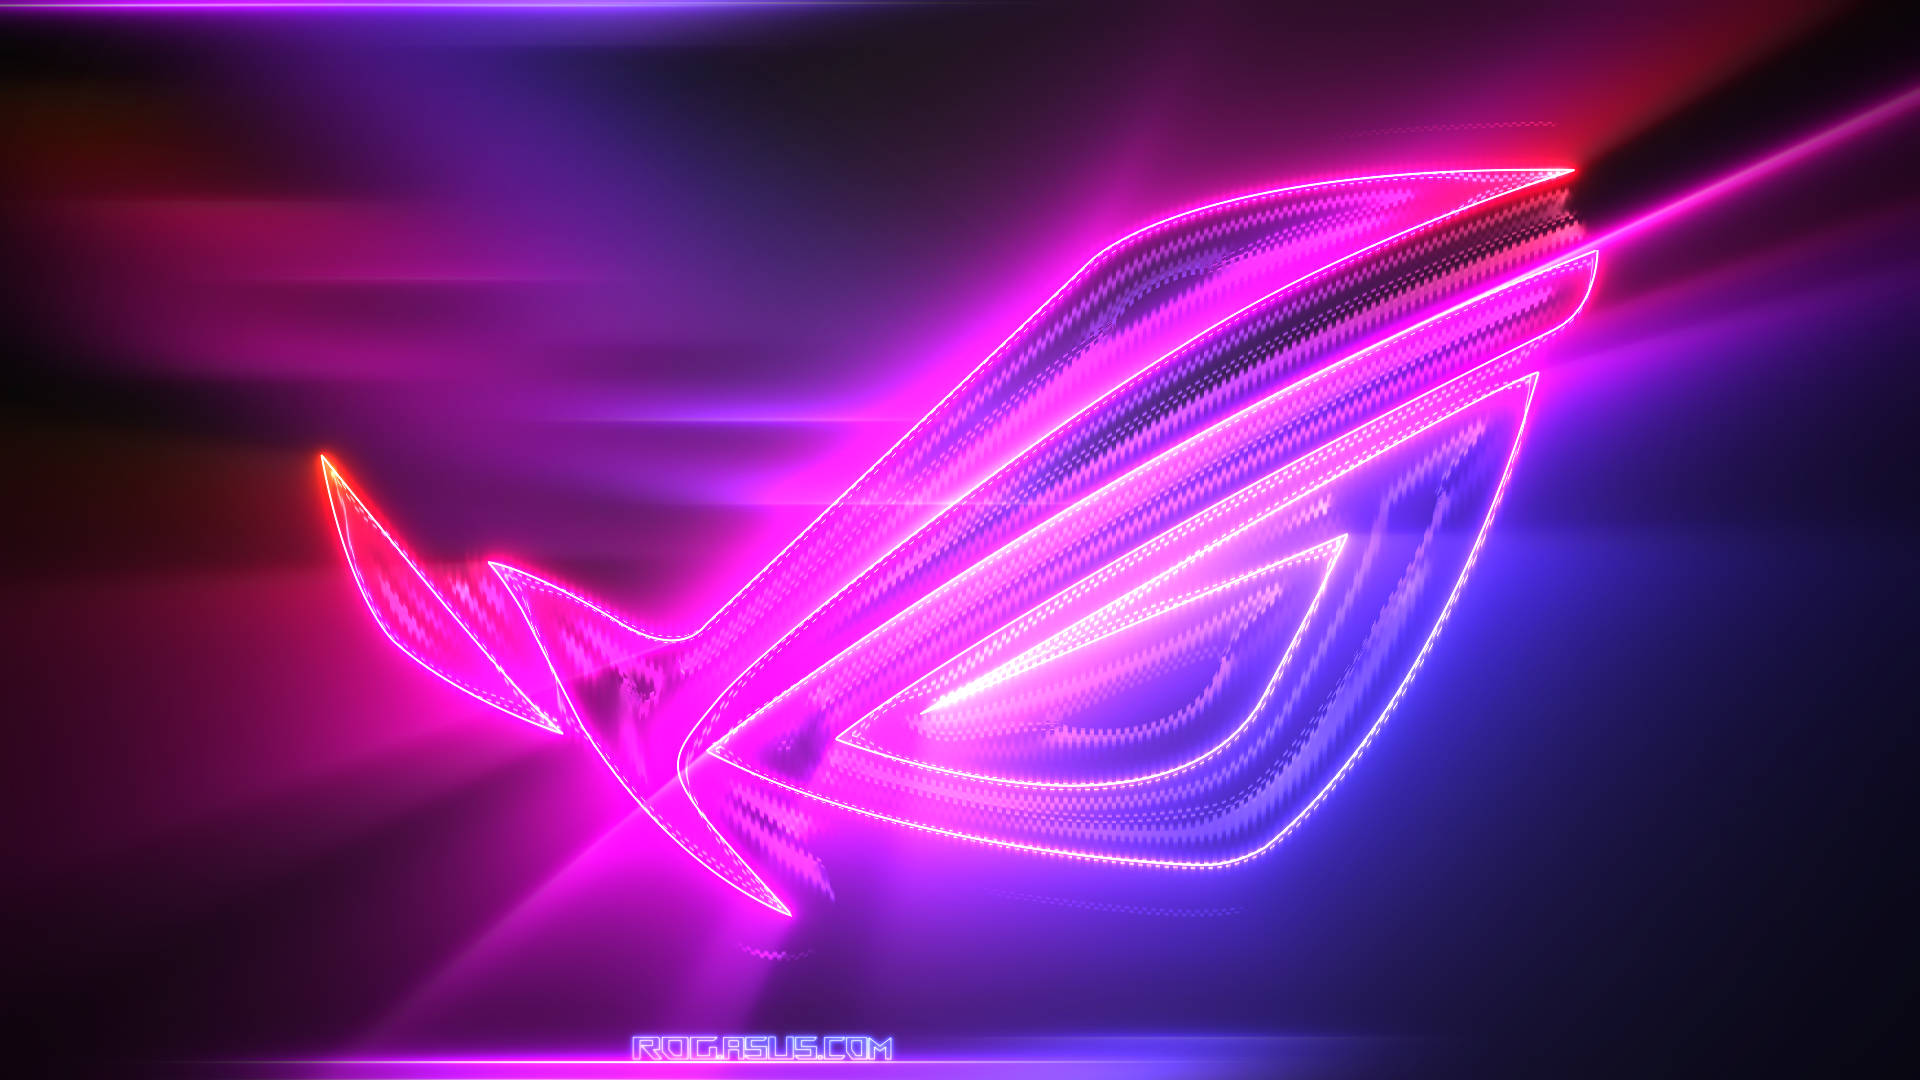 Asus Rog 1920X1080 Wallpaper and Background Image